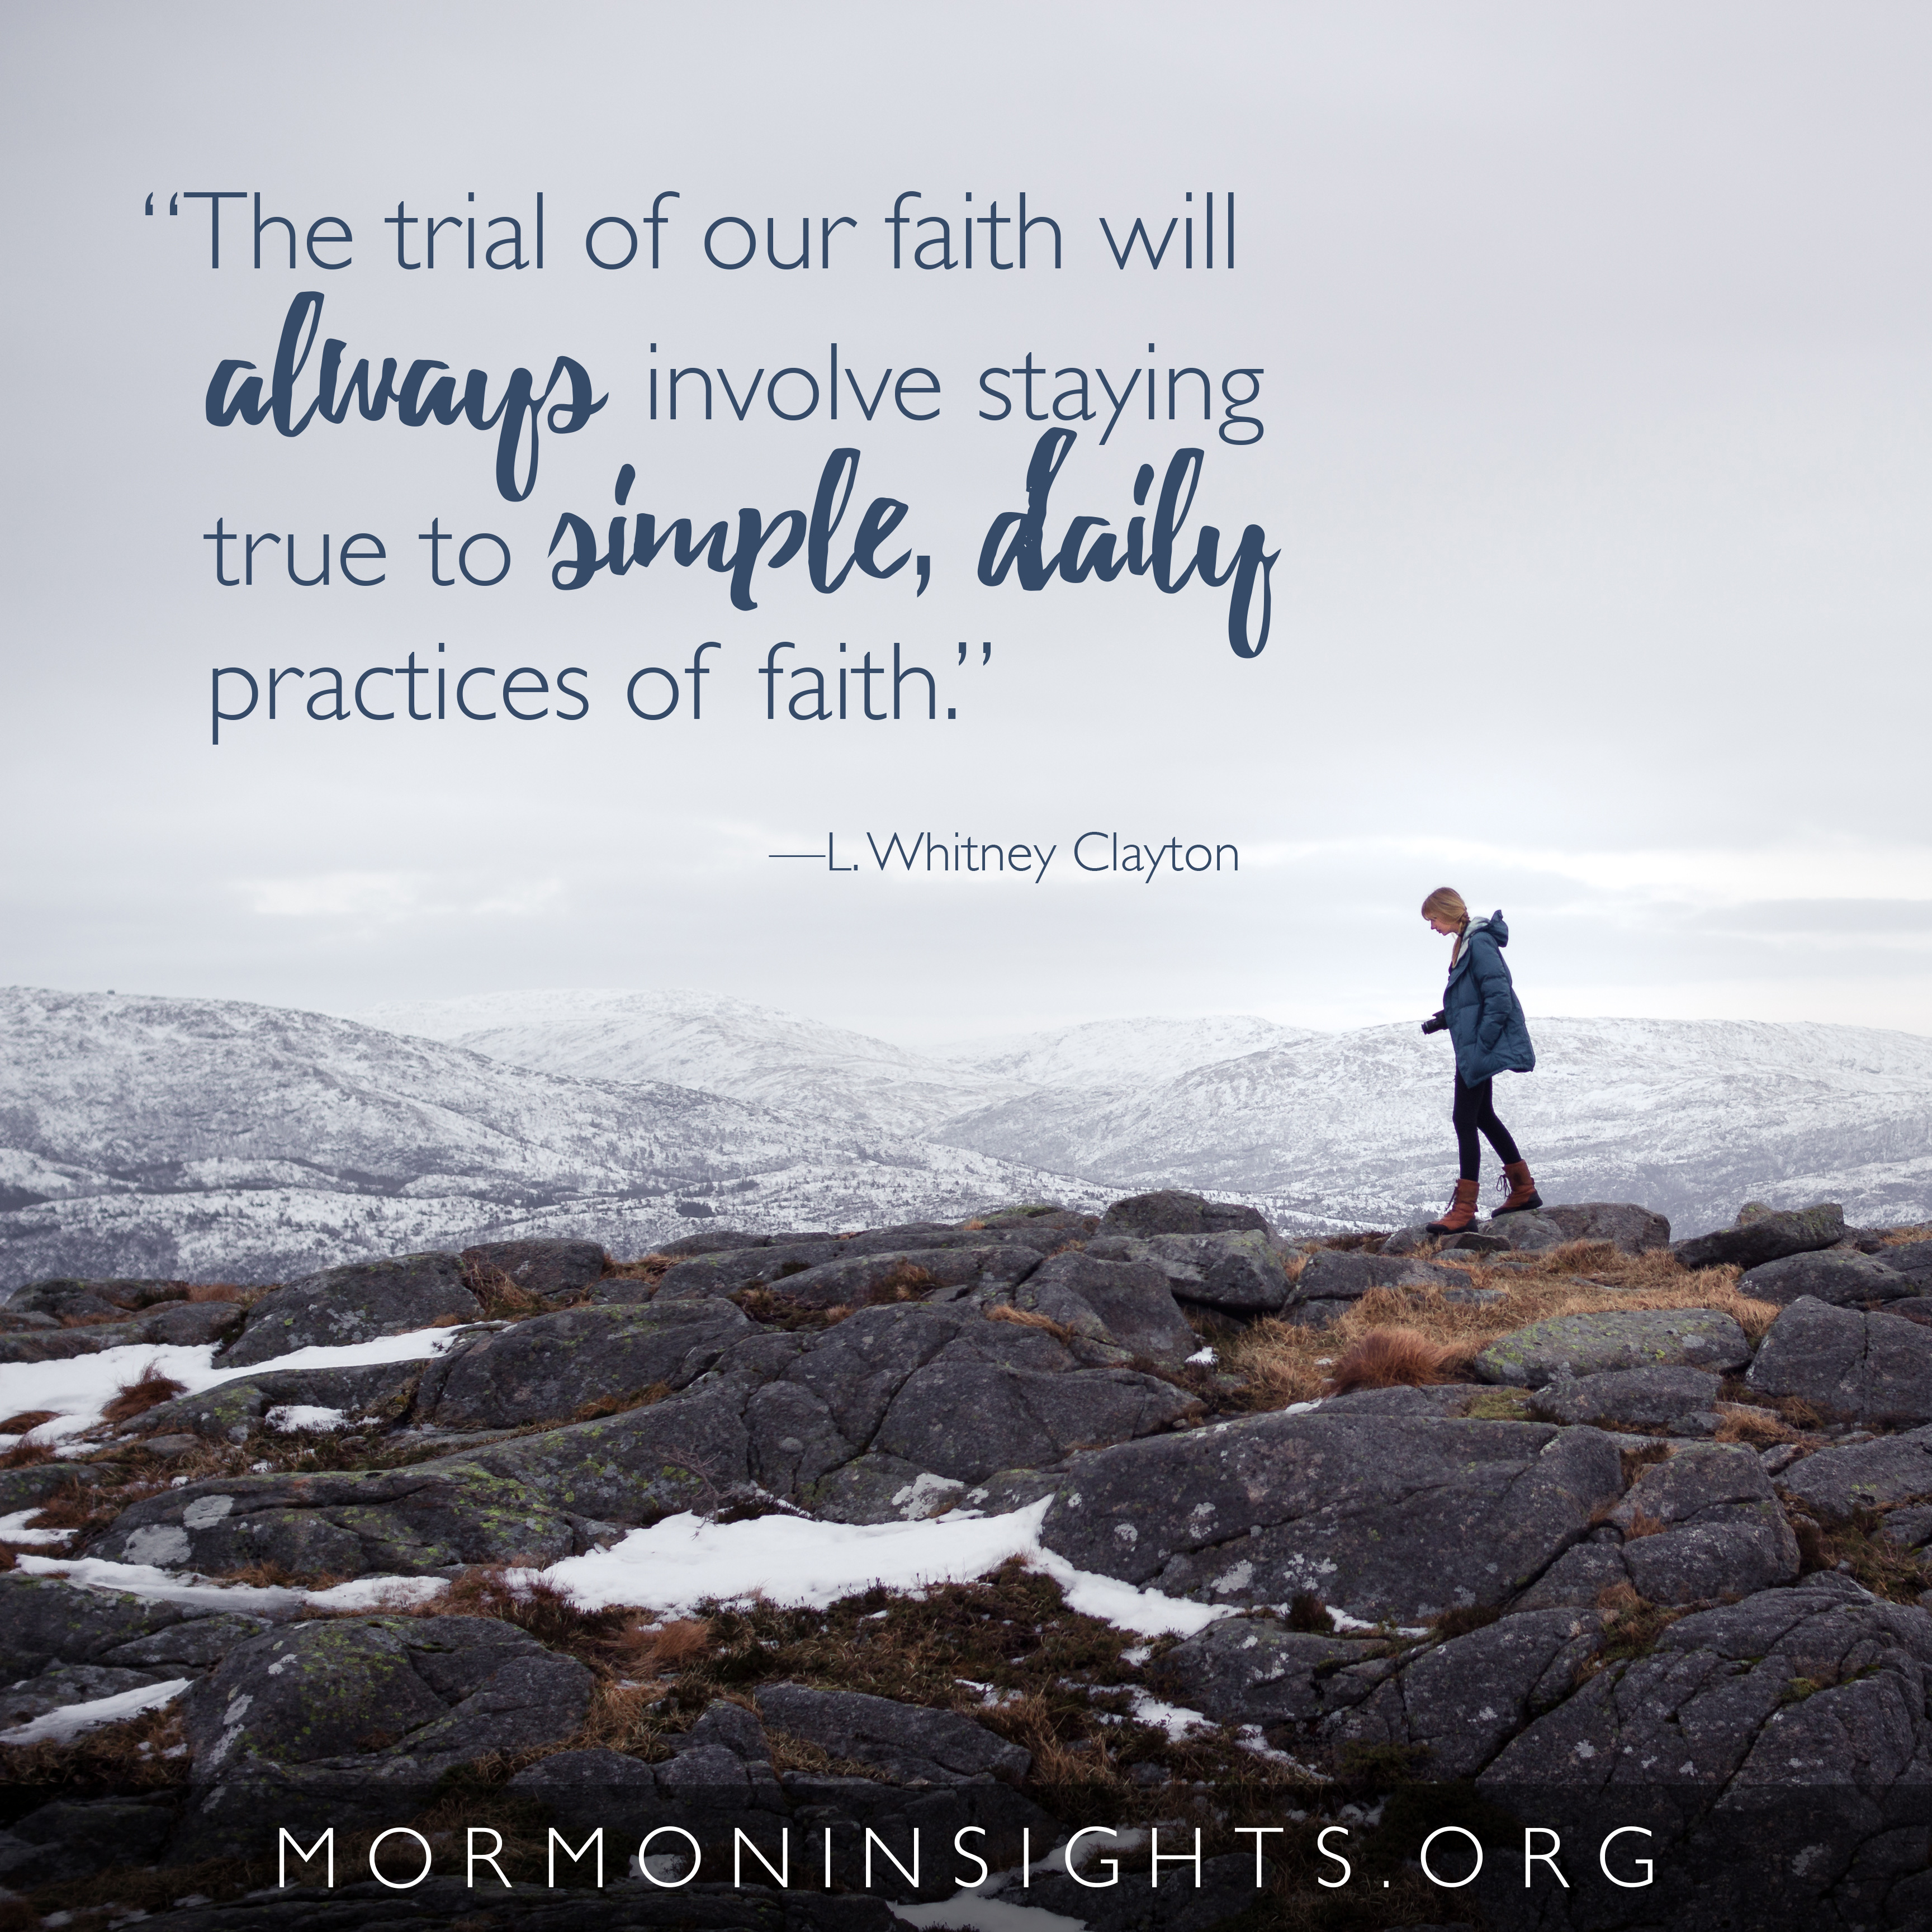 "The trial of our faith will always involve staying true to simple, daily practices of faith." -L. Whitney Clayton. Person walking on rocks in the mountains